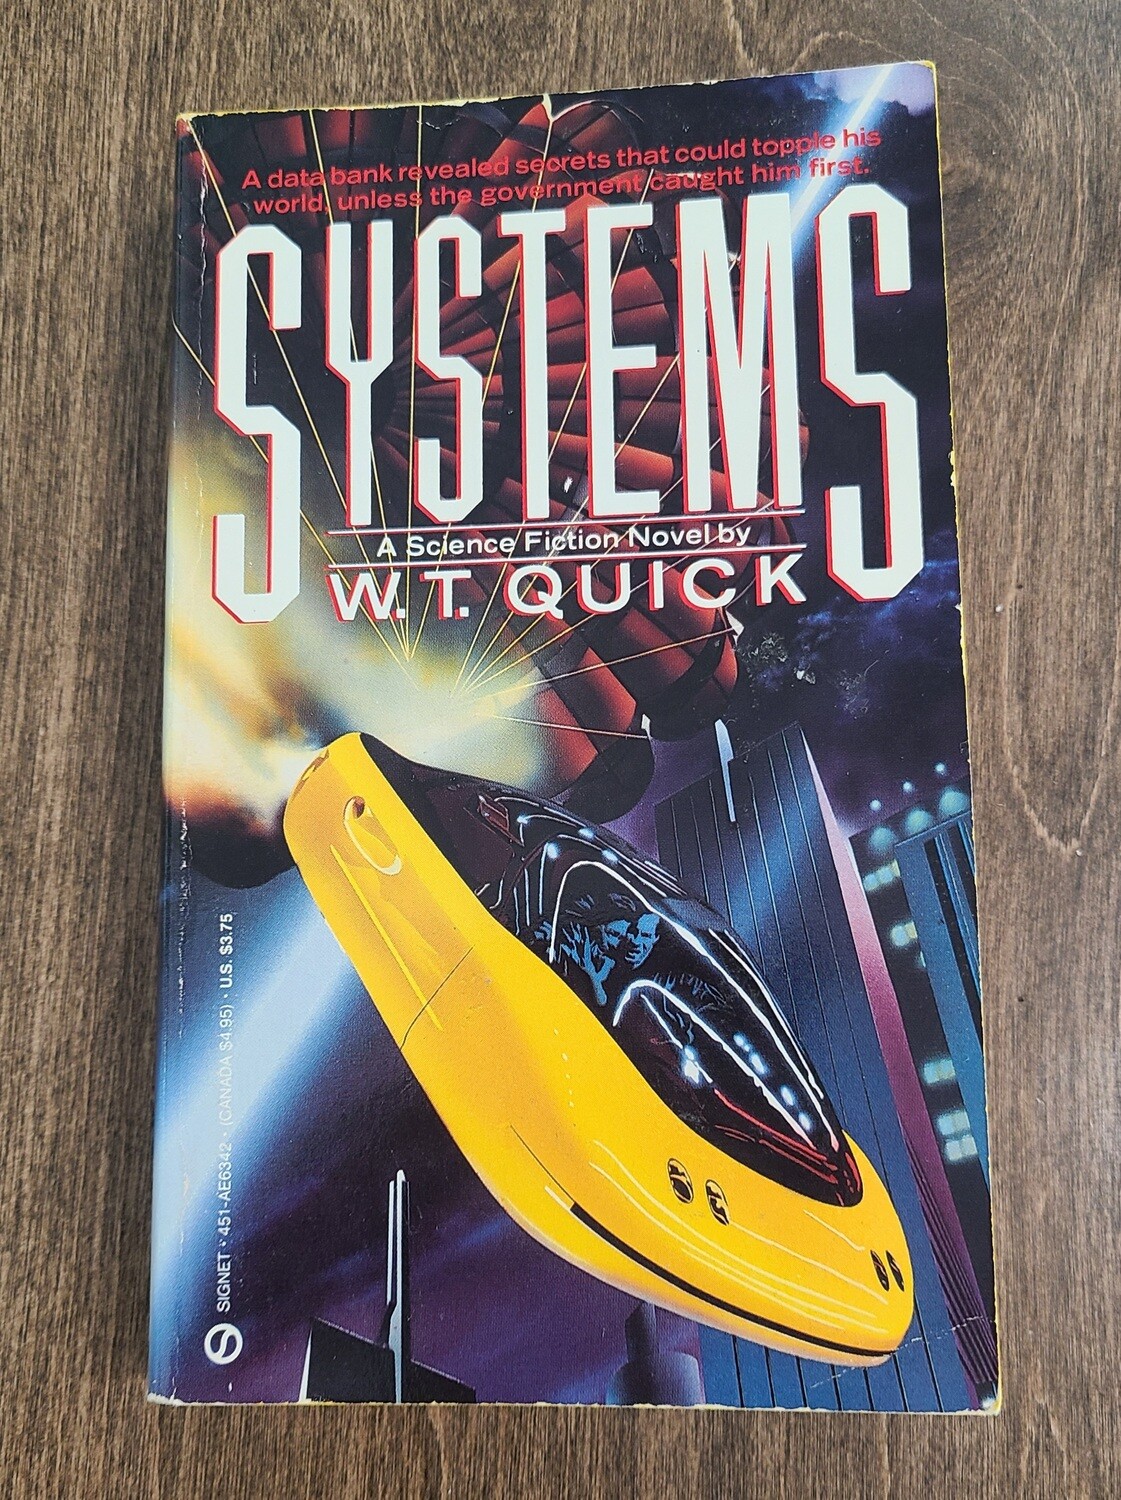 Systems by W. T. Quick